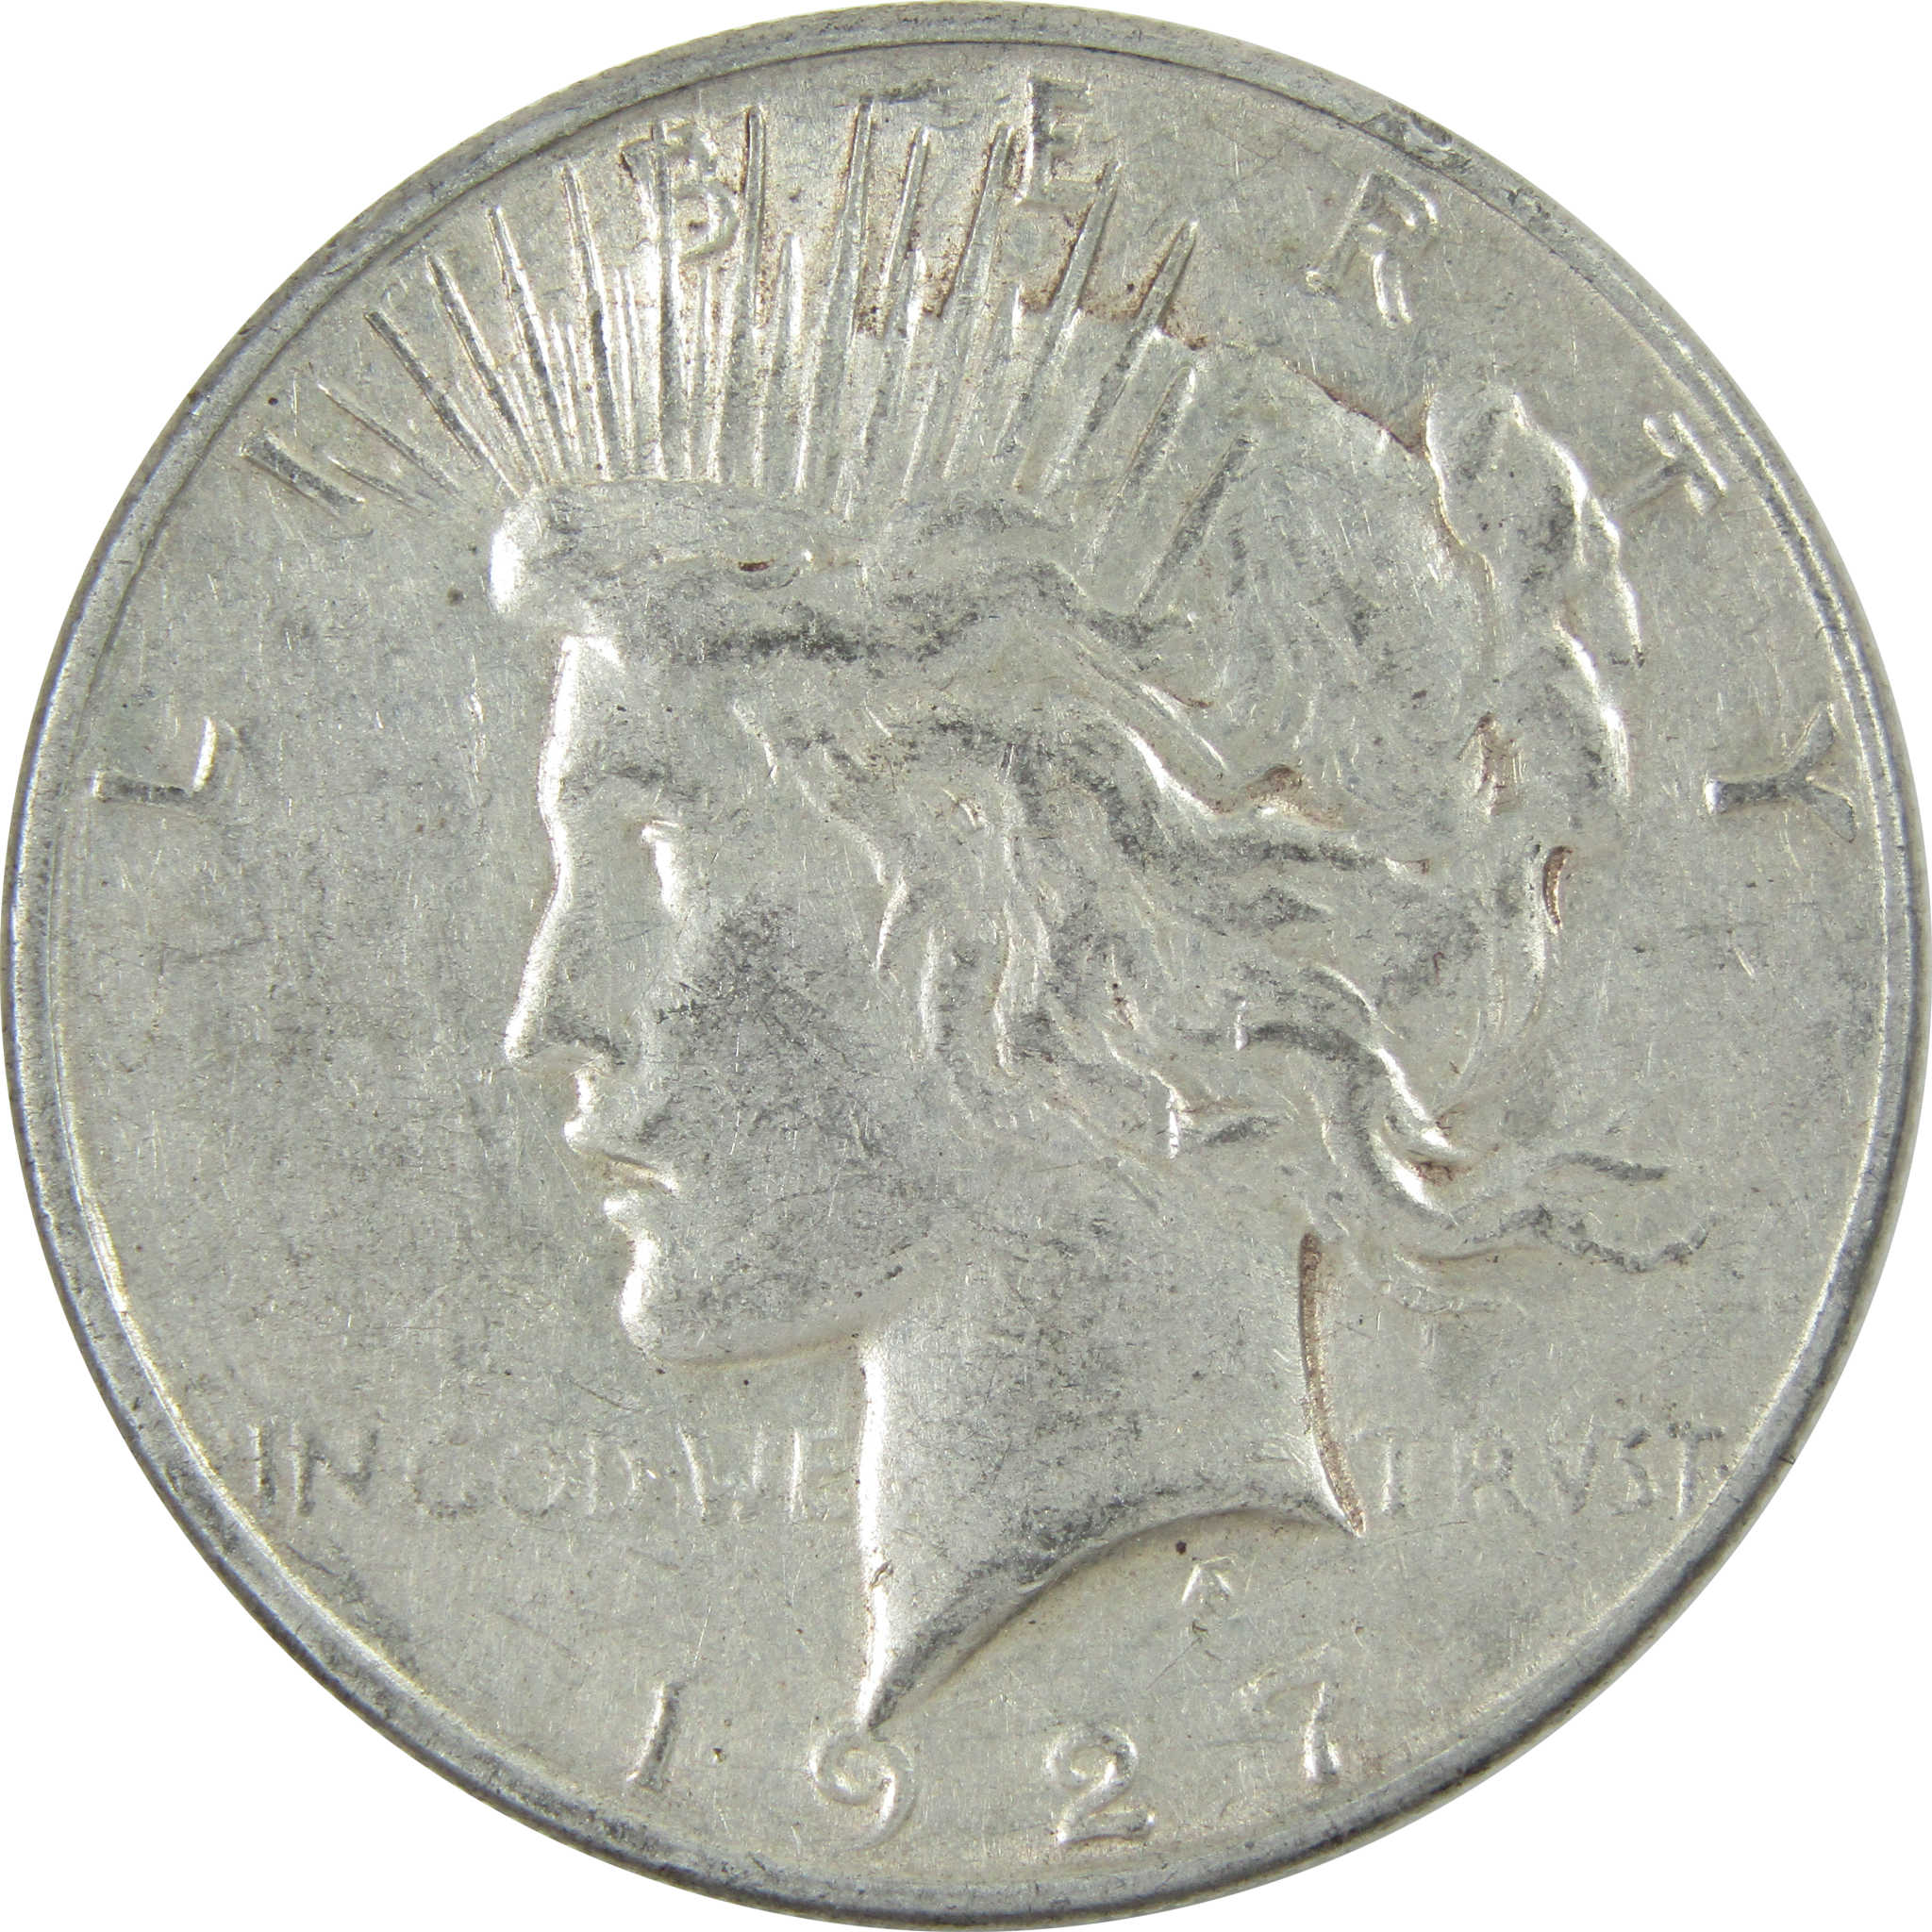 1927 S Peace Dollar XF EF Extremely Fine Silver $1 Coin SKU:I13687